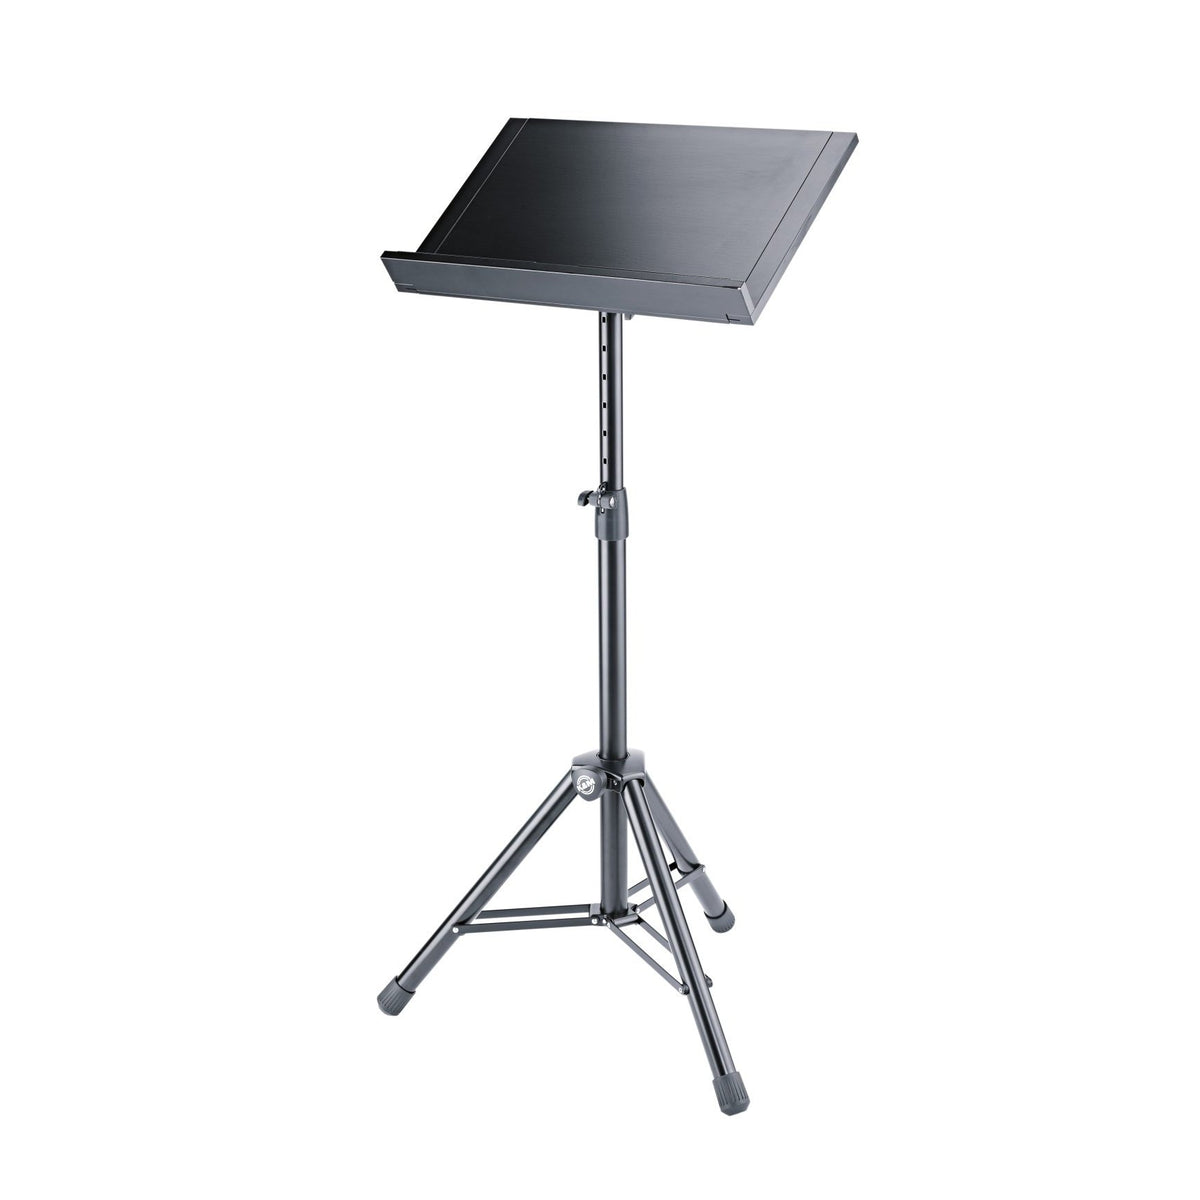 KÃ¶nig &amp; Meyer - 12338 Orchestra Conductor Stand Desk-Music Stand-KÃ¶nig &amp; Meyer-Music Elements